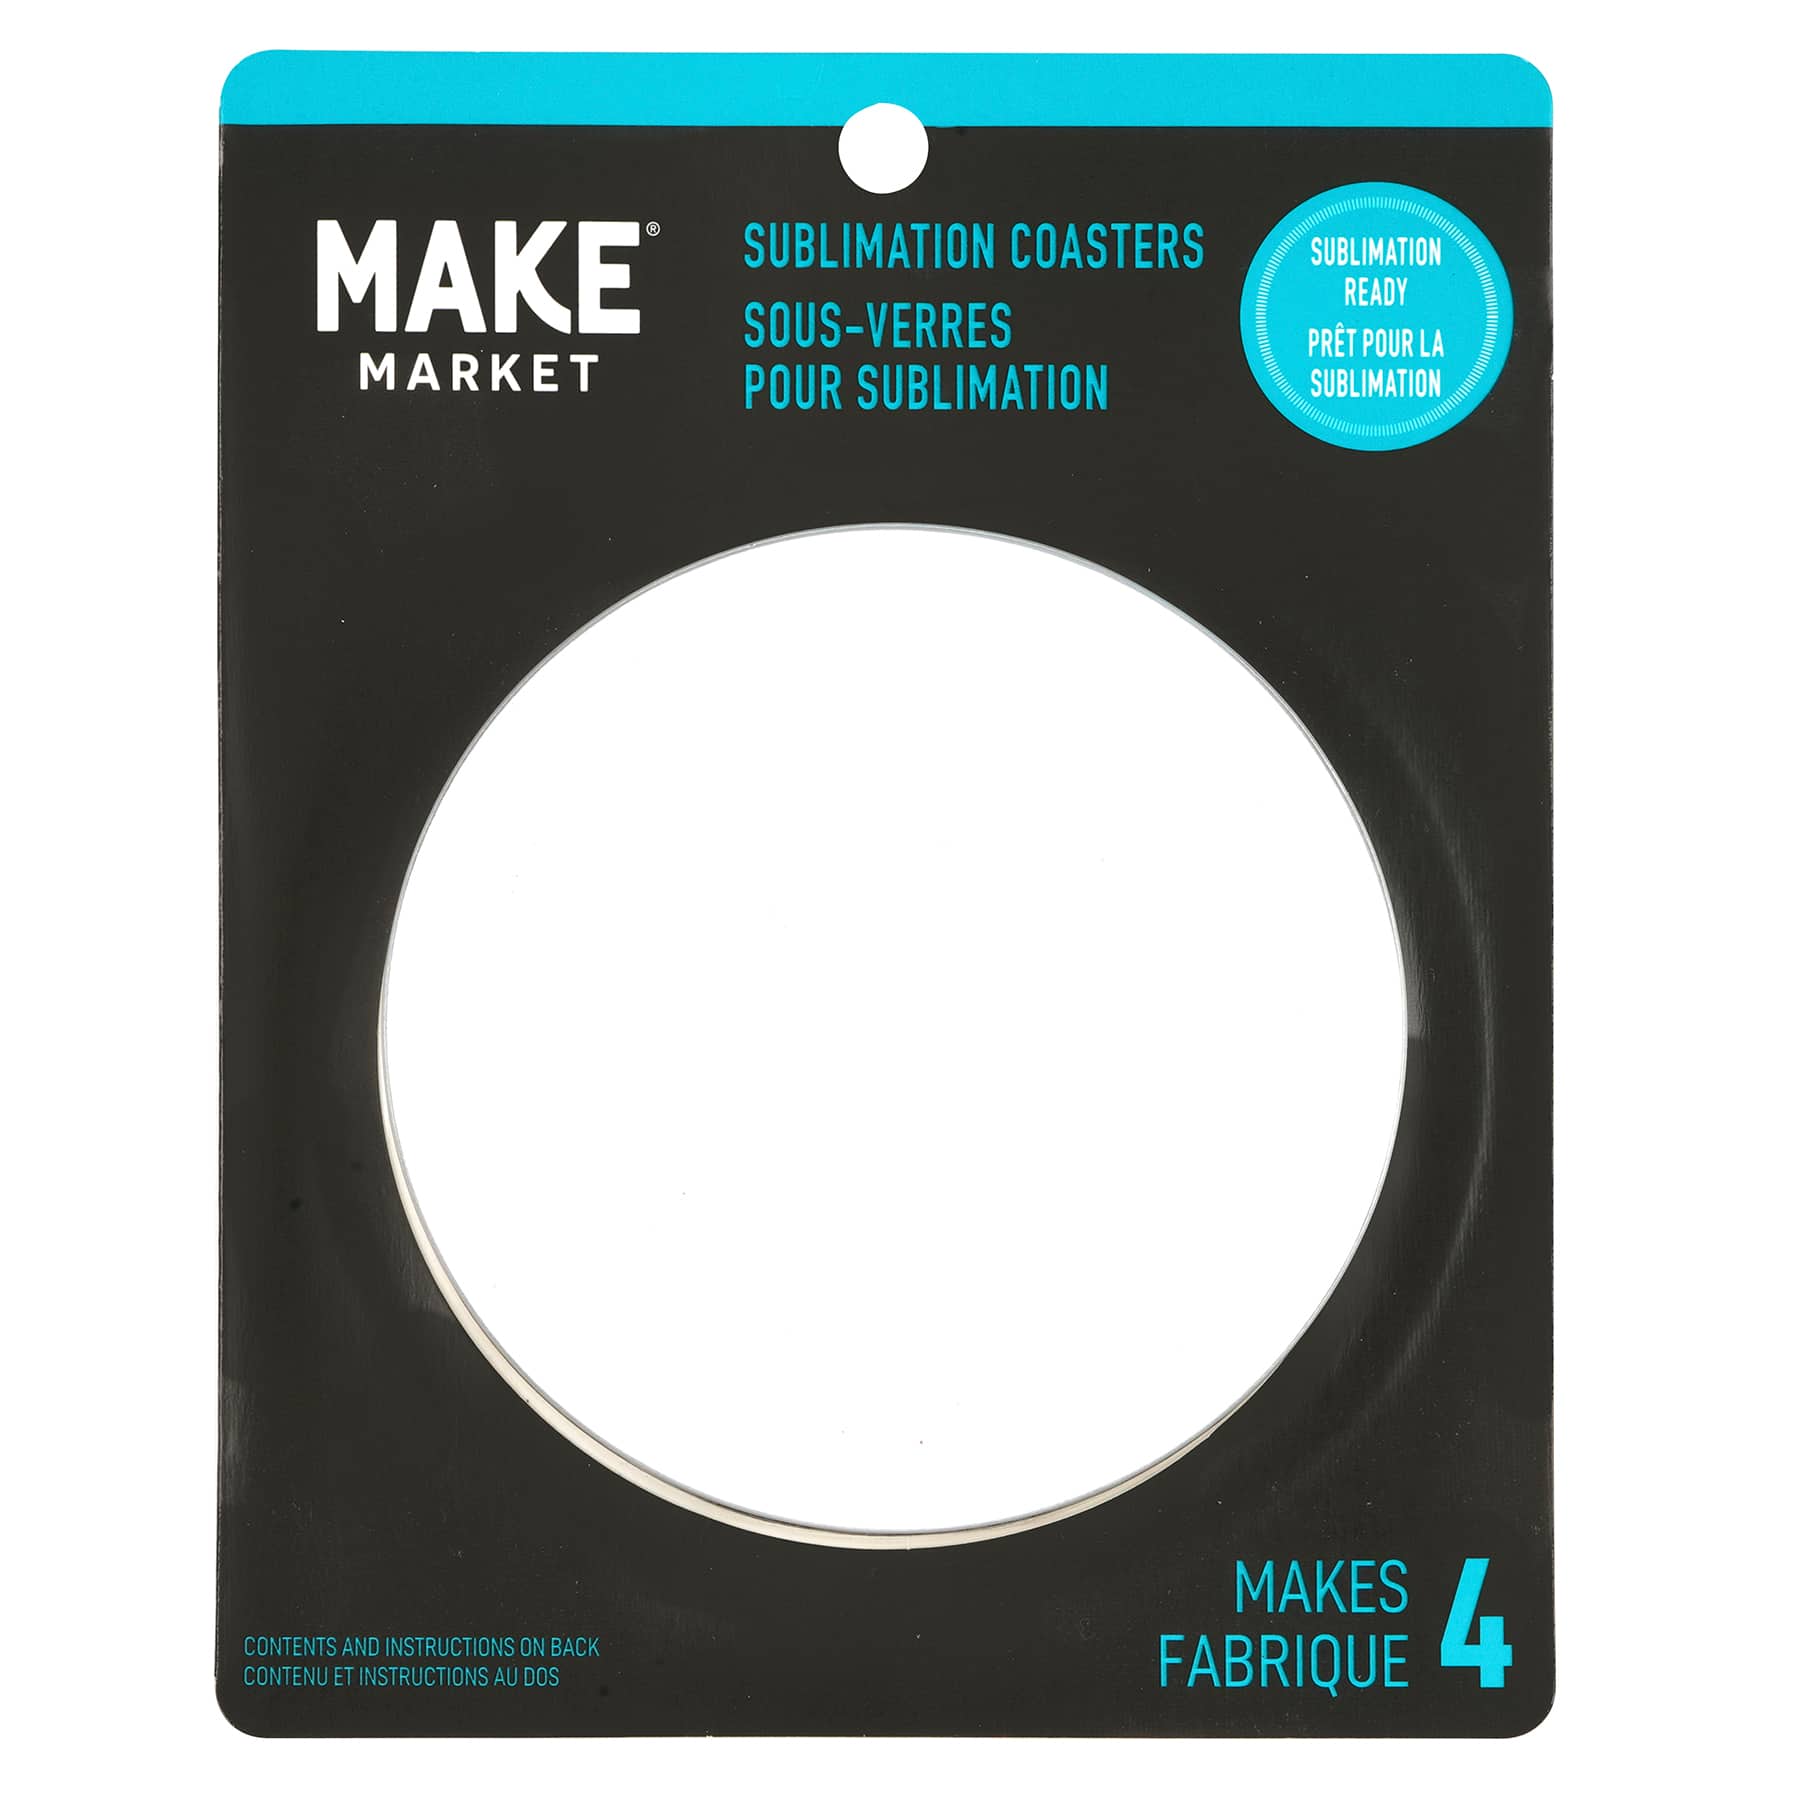 12 Packs: 4 ct. (48 total) 3.5 Round Sublimation Coasters by Make Market®